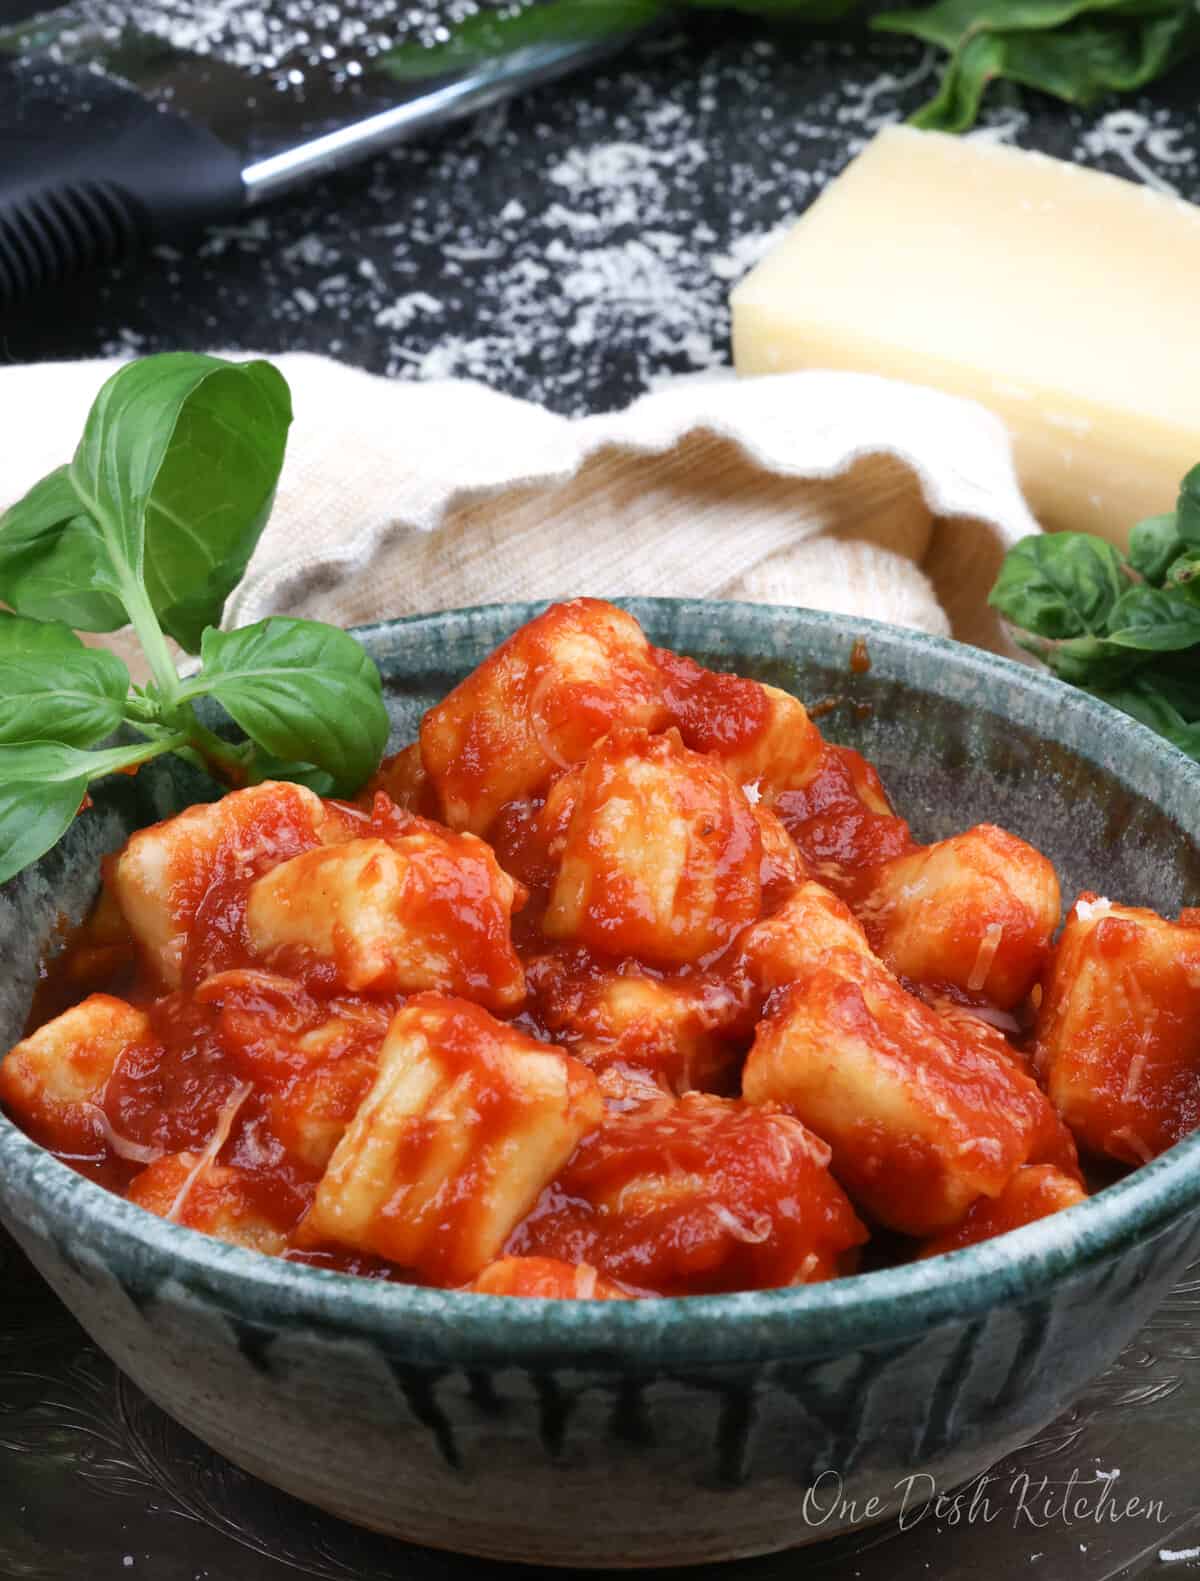 potato gnocchi topped with tomato sauce in a green bowl next to fresh basil and parmesan cheese.